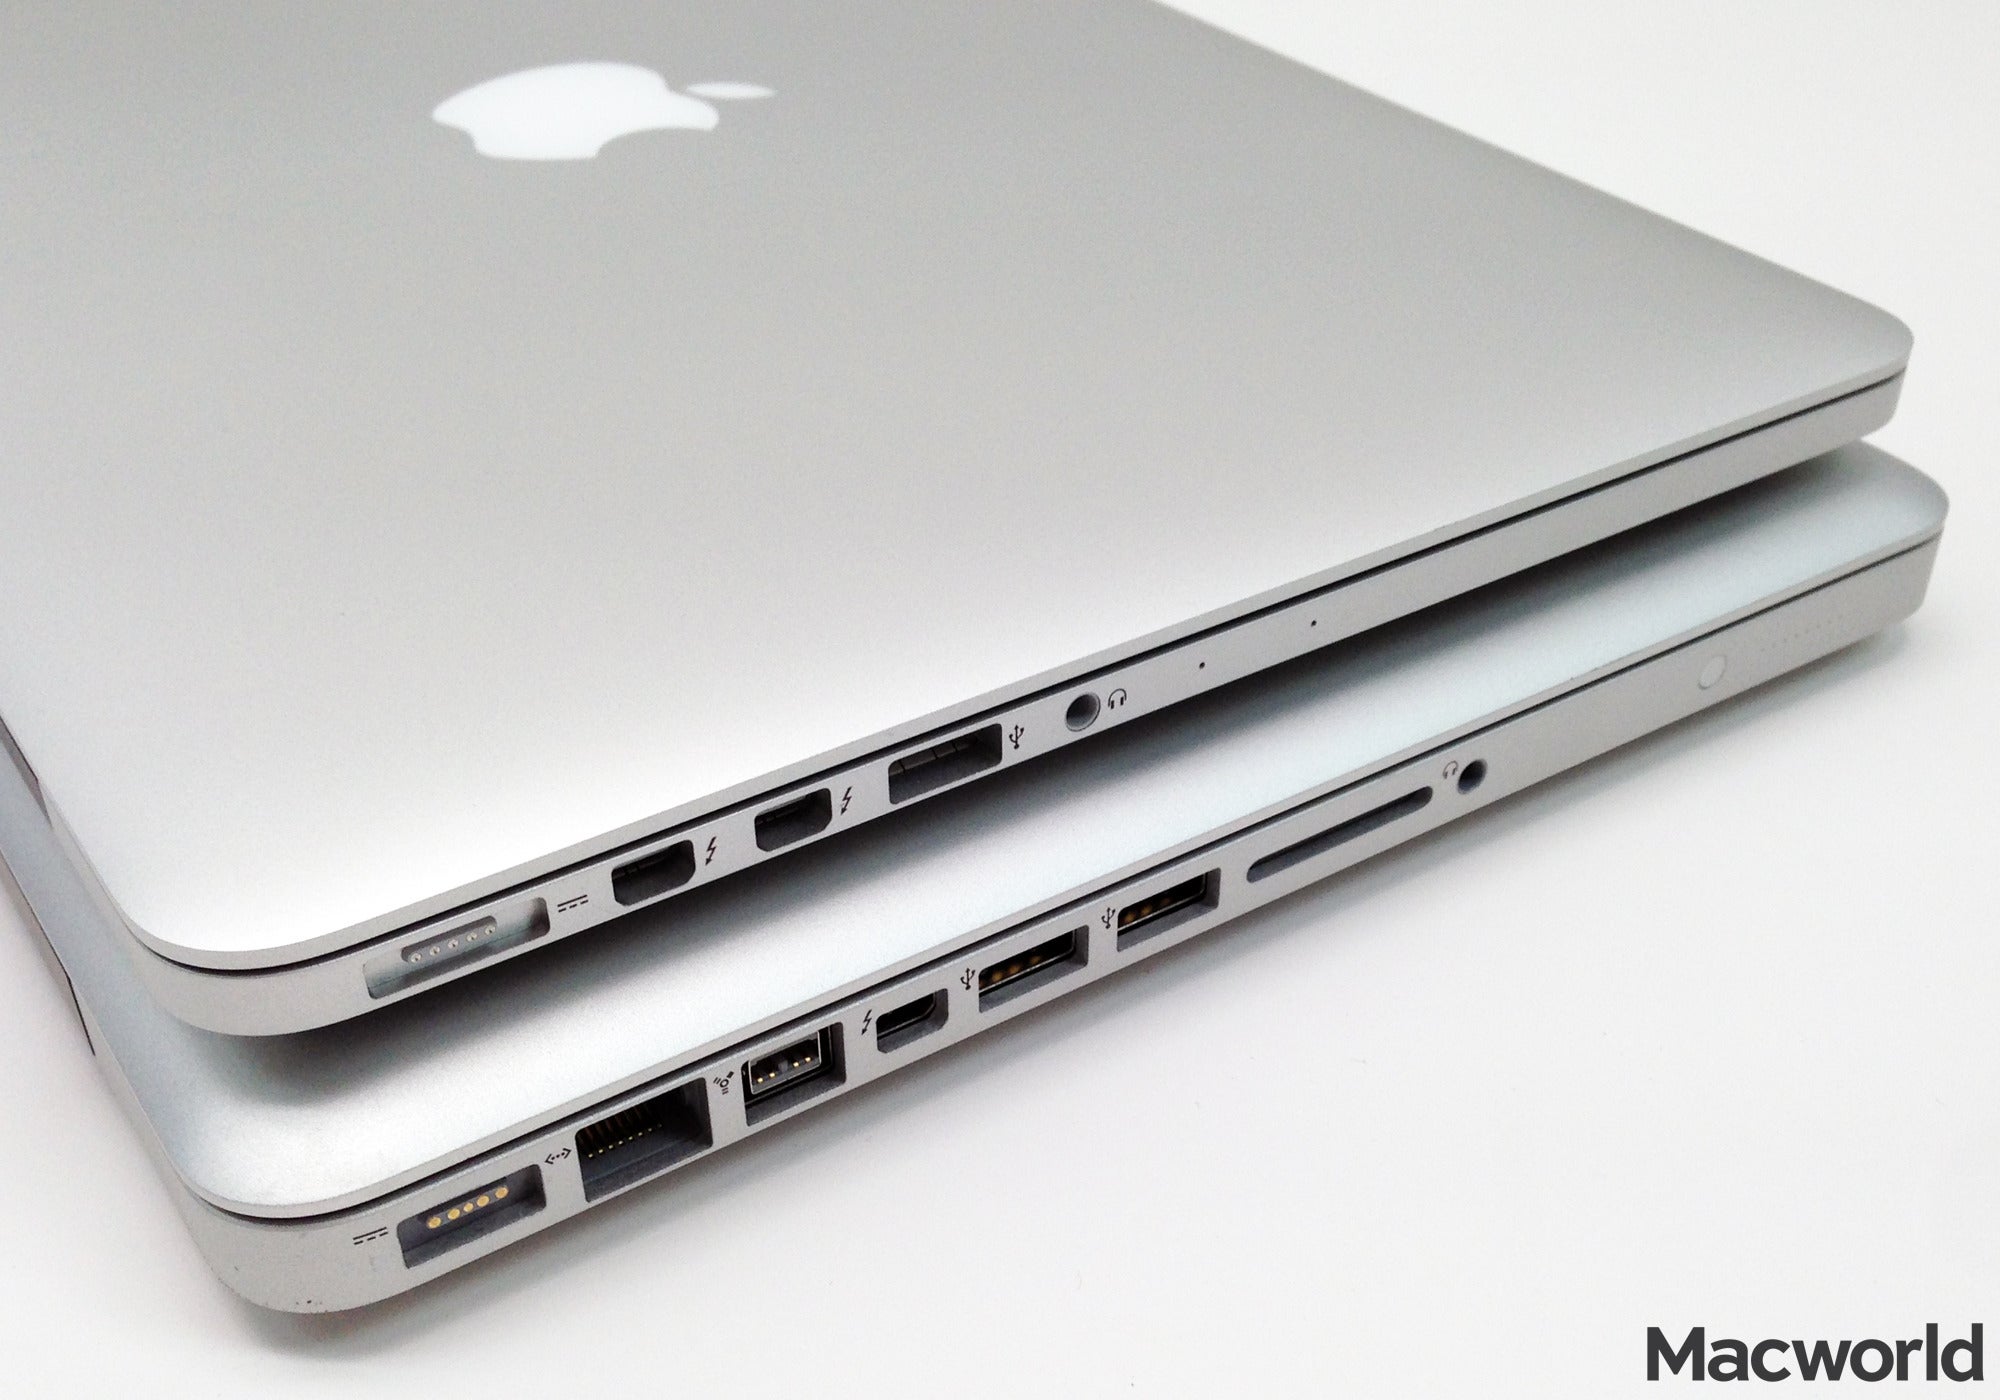 Review 13 Inch Retina Macbook Pro Offers Optimal Choice For Lightweight Laptop Users Macworld